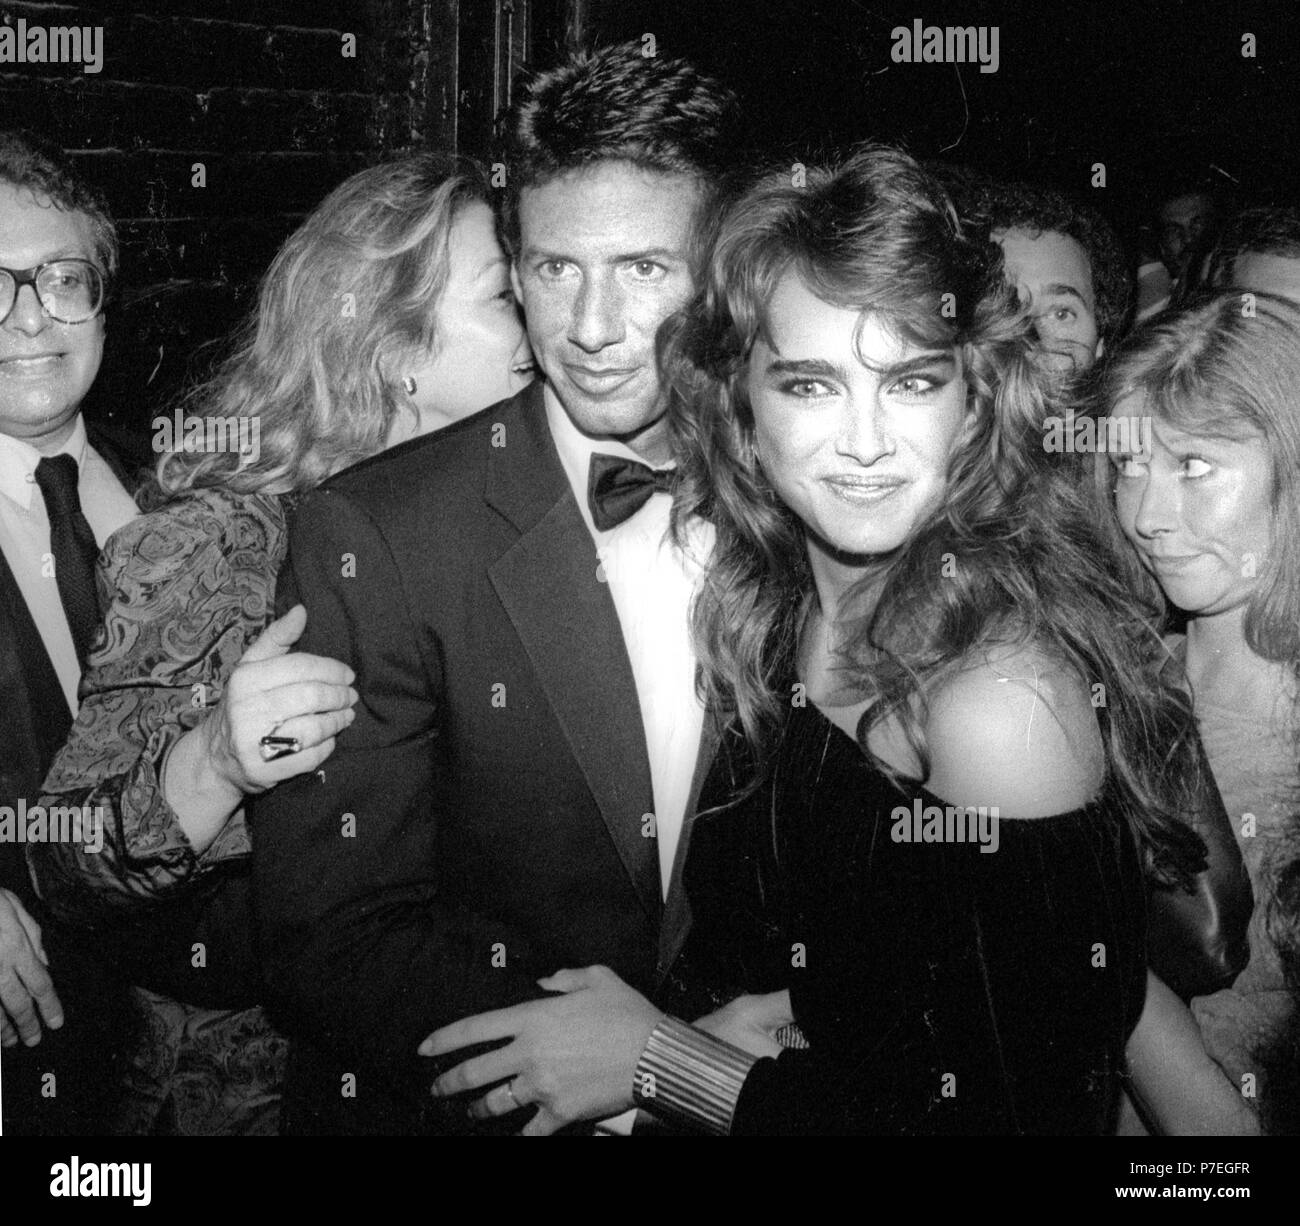 1981 New York City Calvin Klein and Brooke Shields at Studio 54 Credit:  Adam Scull-PHOTOlink/MediaPunch Stock Photo - Alamy